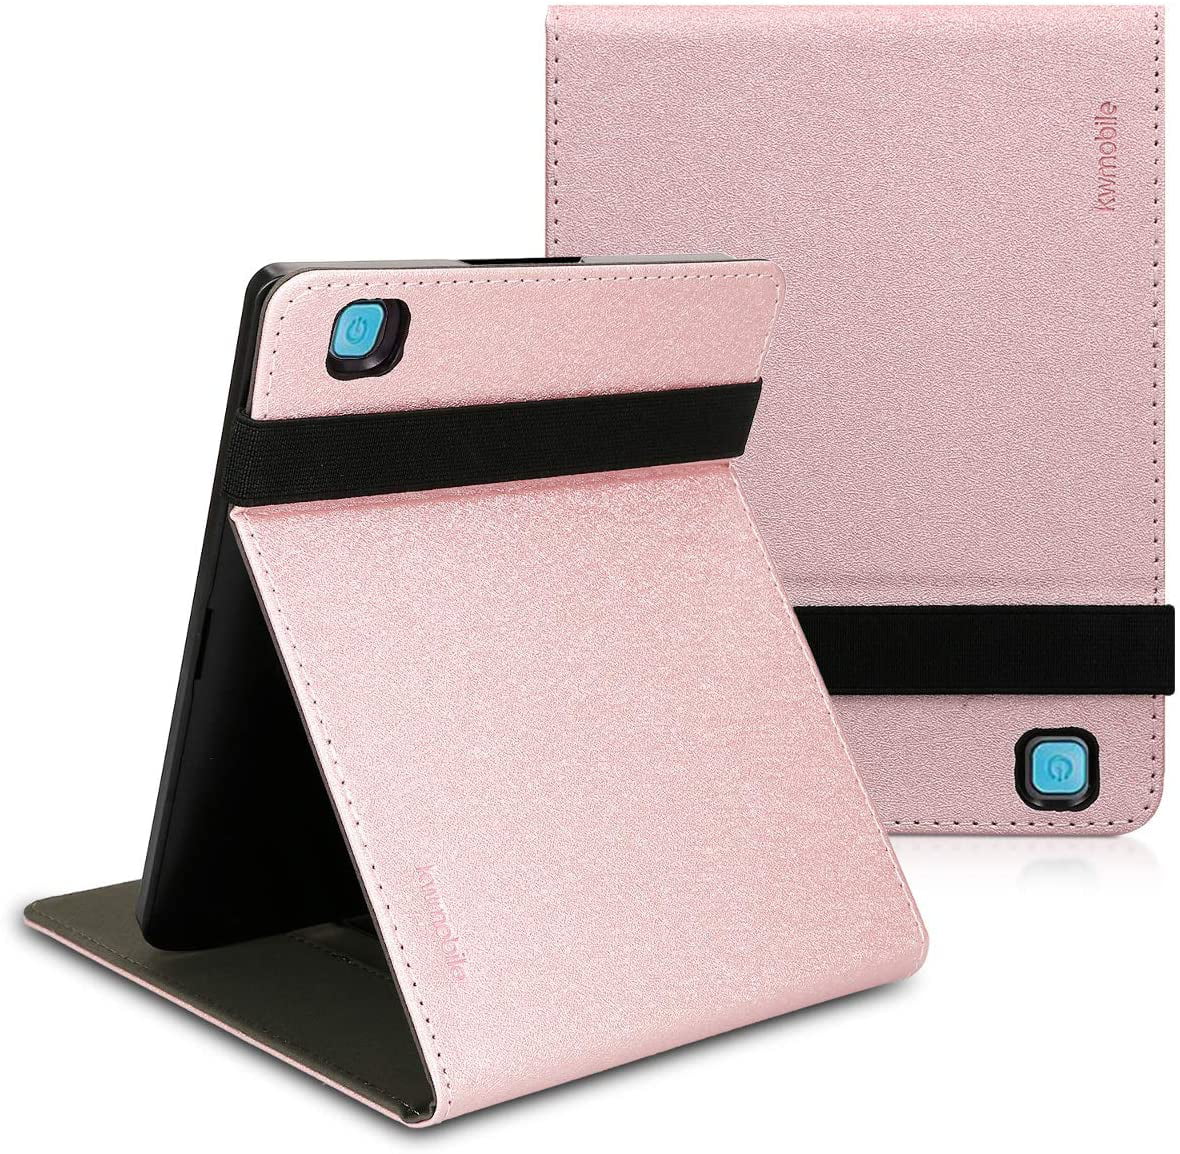 Light Pink/Dark Pink/Dark Blue kwmobile Case for Kobo Aura Edition 2 Book Style PU Leather Protective e-Reader Cover Folio Case